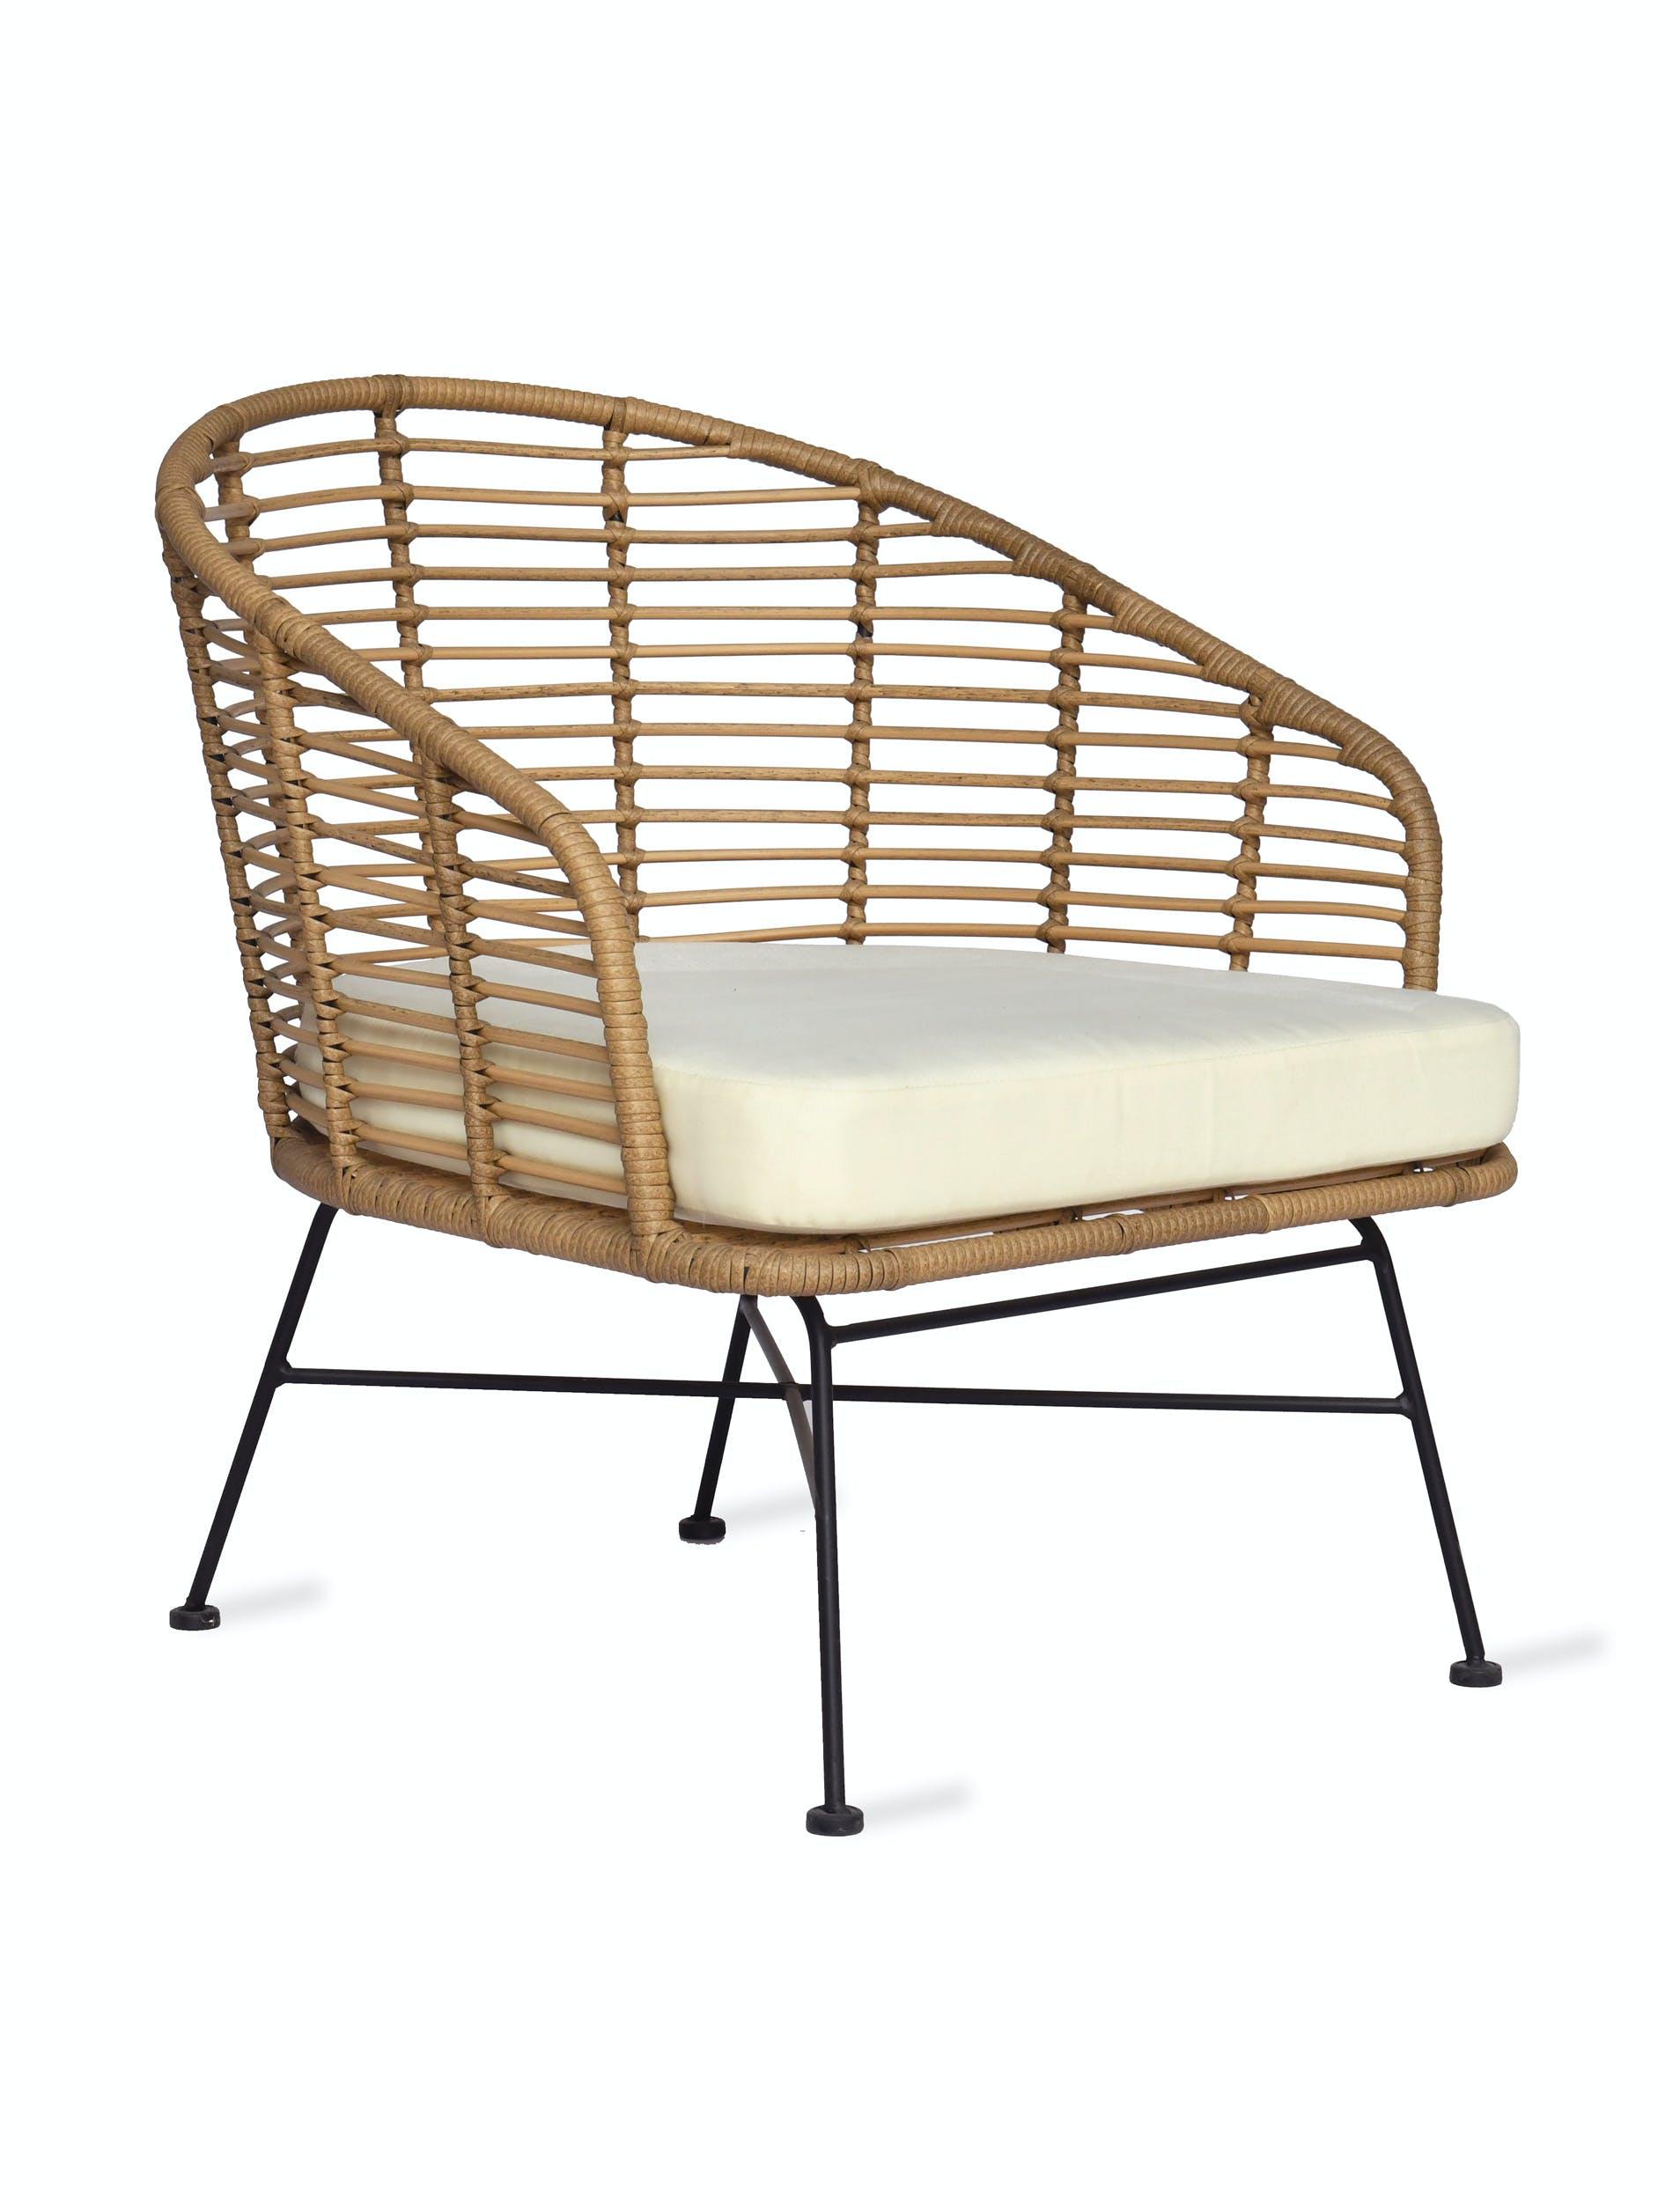 rattan bamboo weave weatherproof garden lounge armchairs with cream cushions for outdoor and indoor use